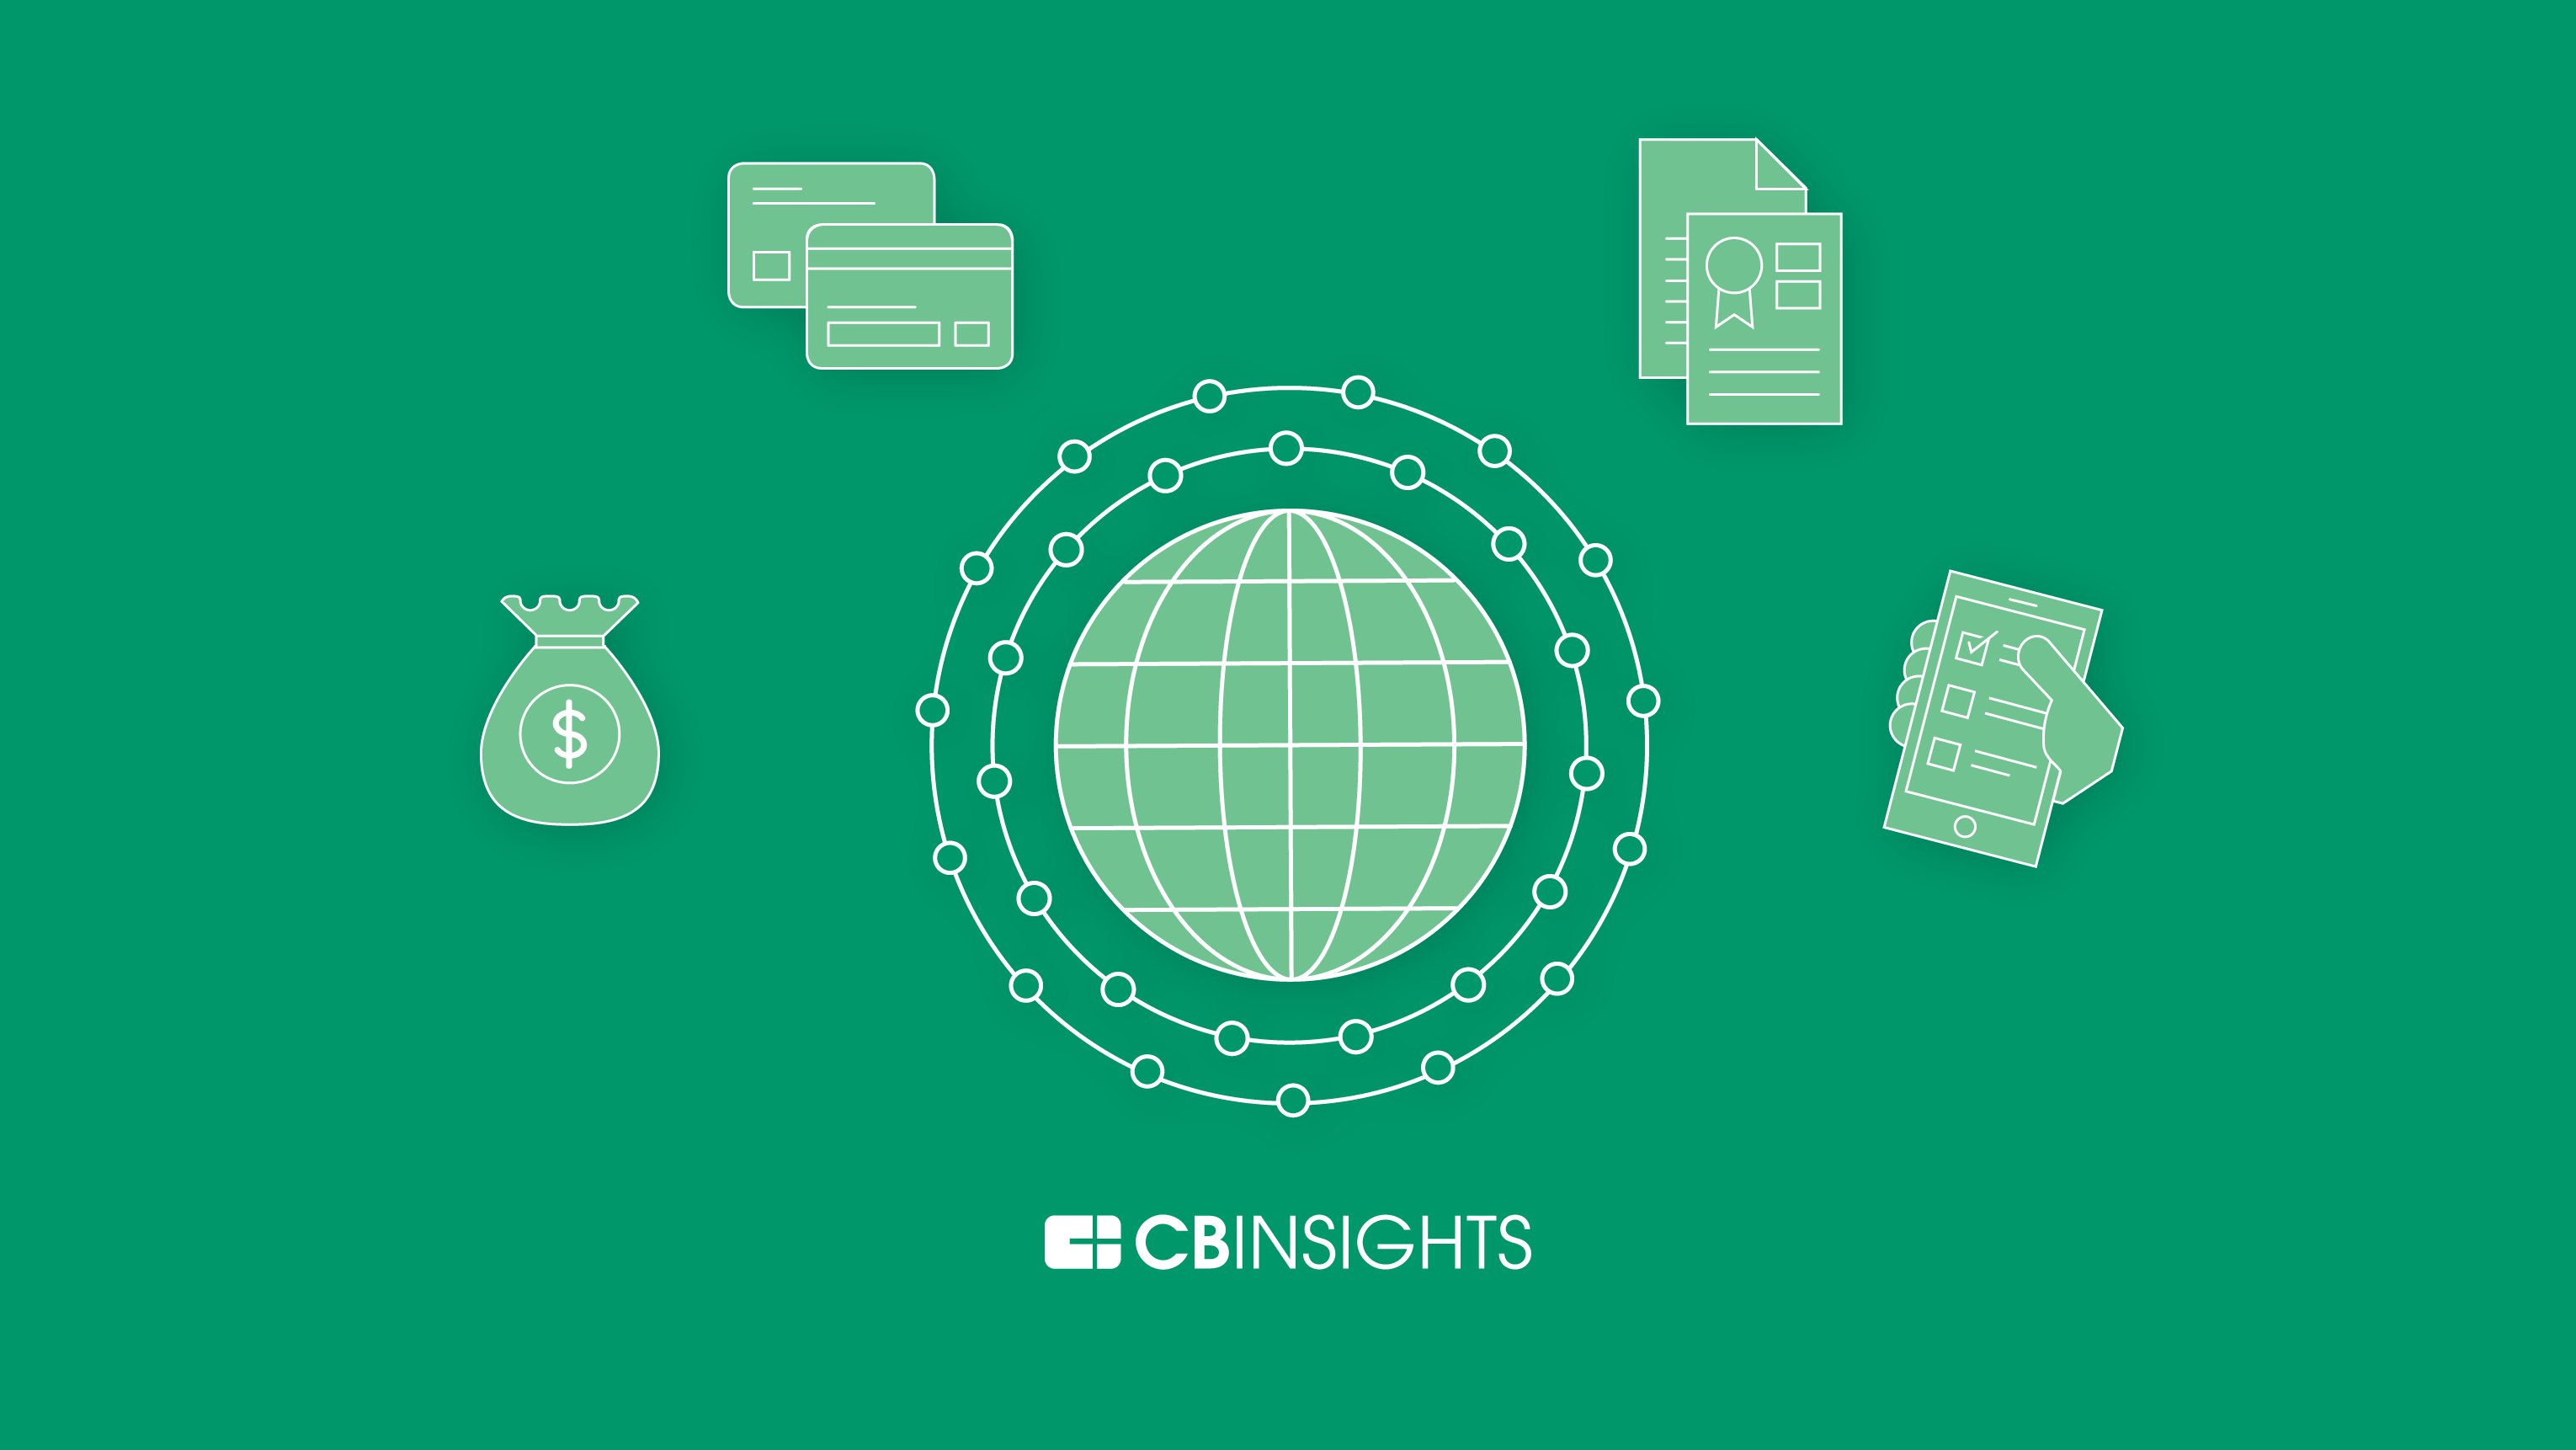 Discover Insights on Crypto, Banking & More